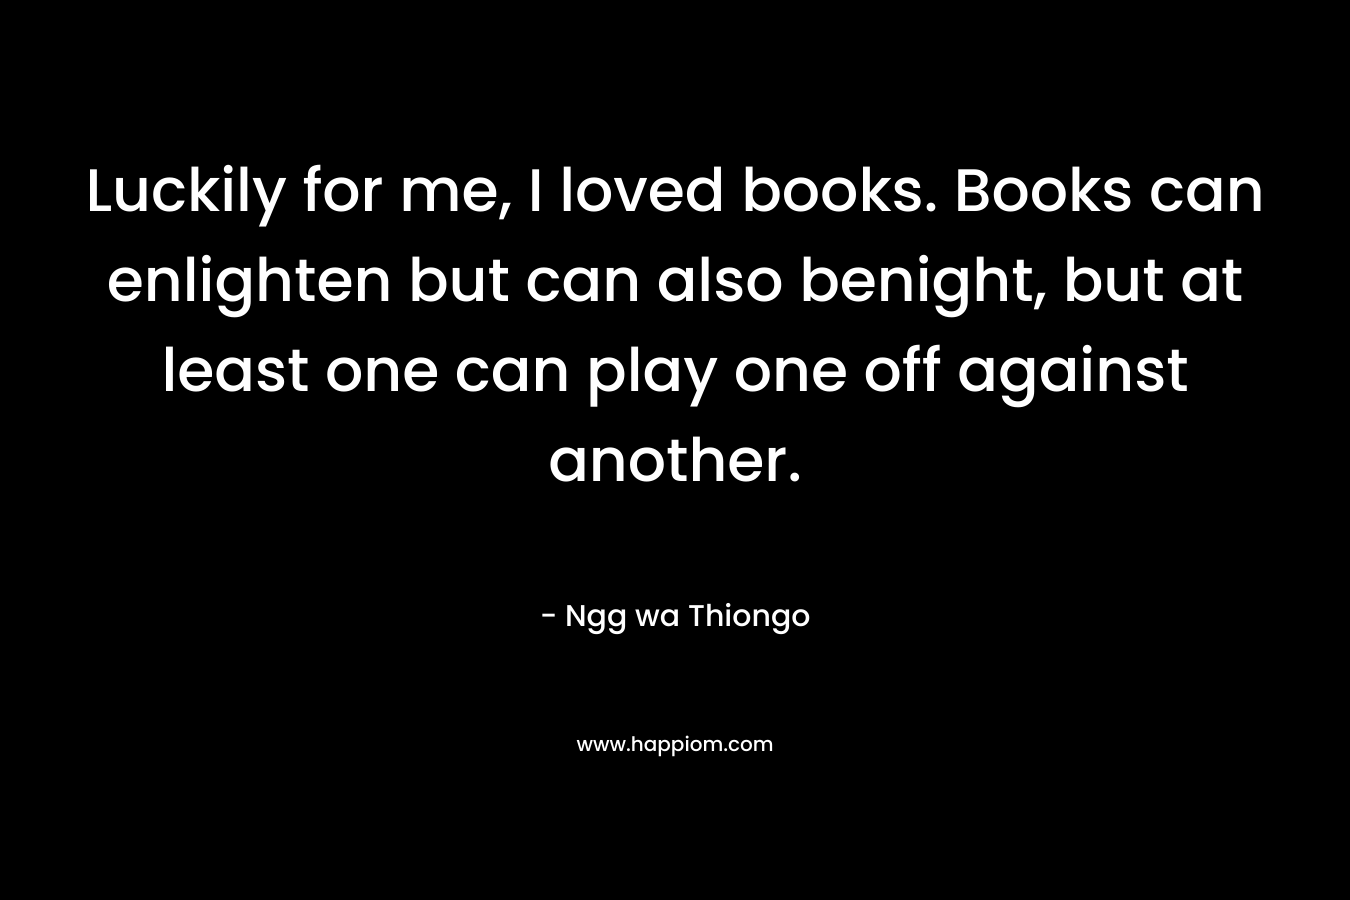 Luckily for me, I loved books. Books can enlighten but can also benight, but at least one can play one off against another. – Ngg wa Thiongo